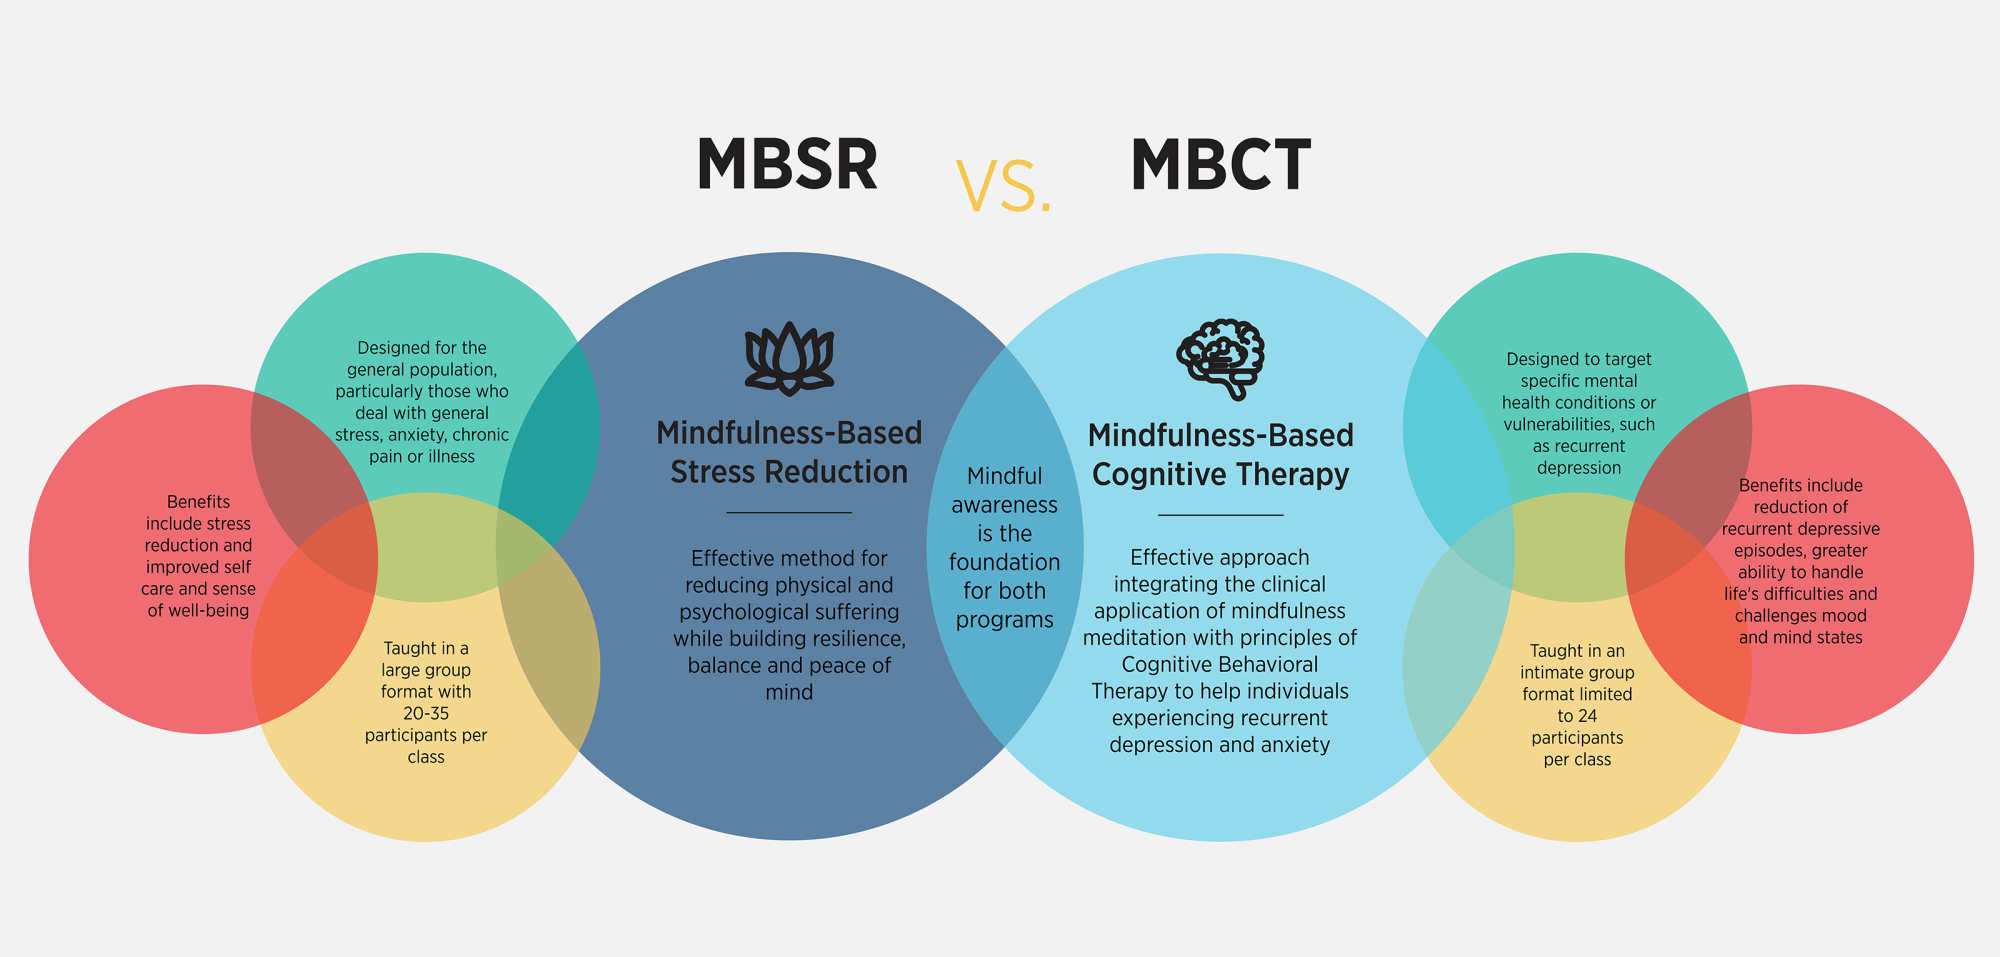 venn diagram of differences between MBSR and MBCT